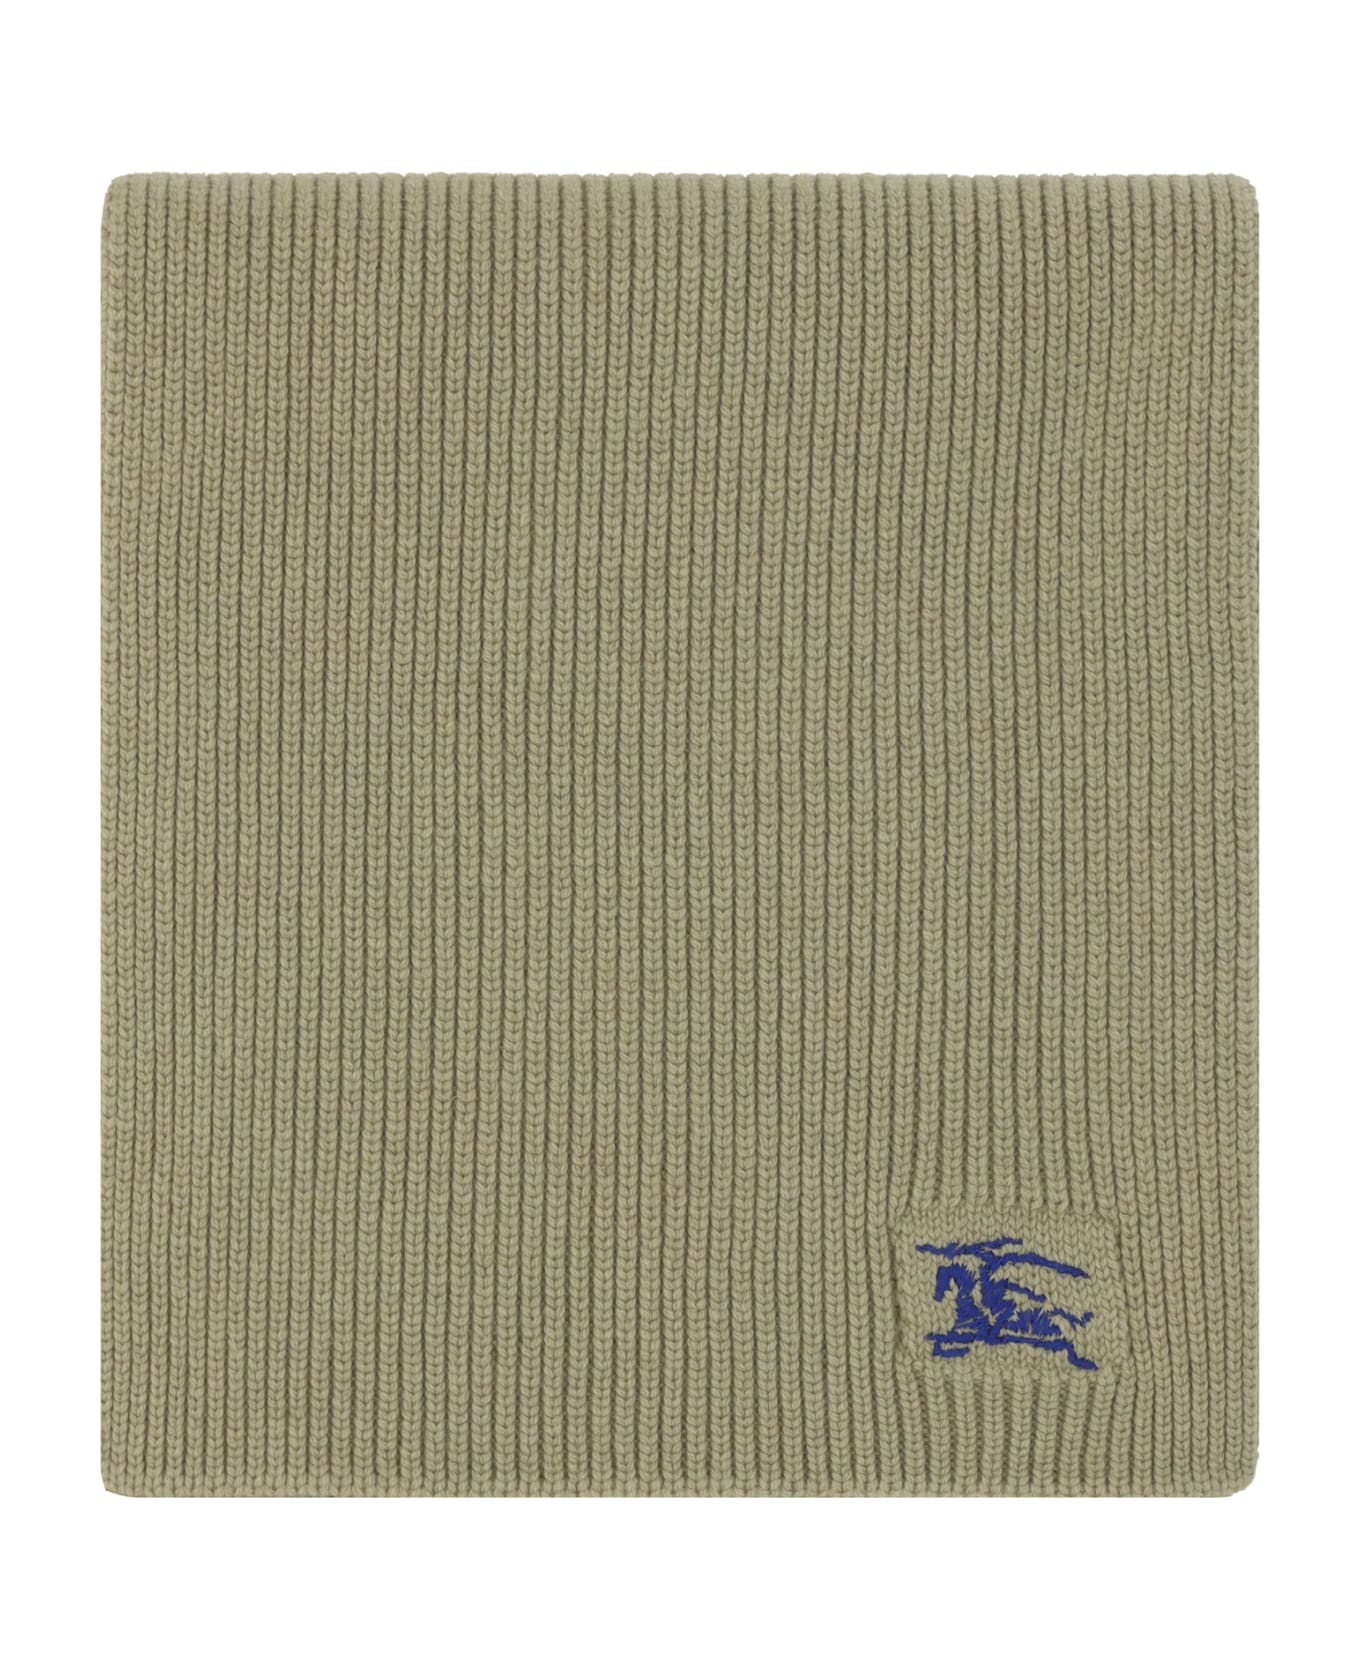 Burberry Green Cashmere Scarf - Green スカーフ